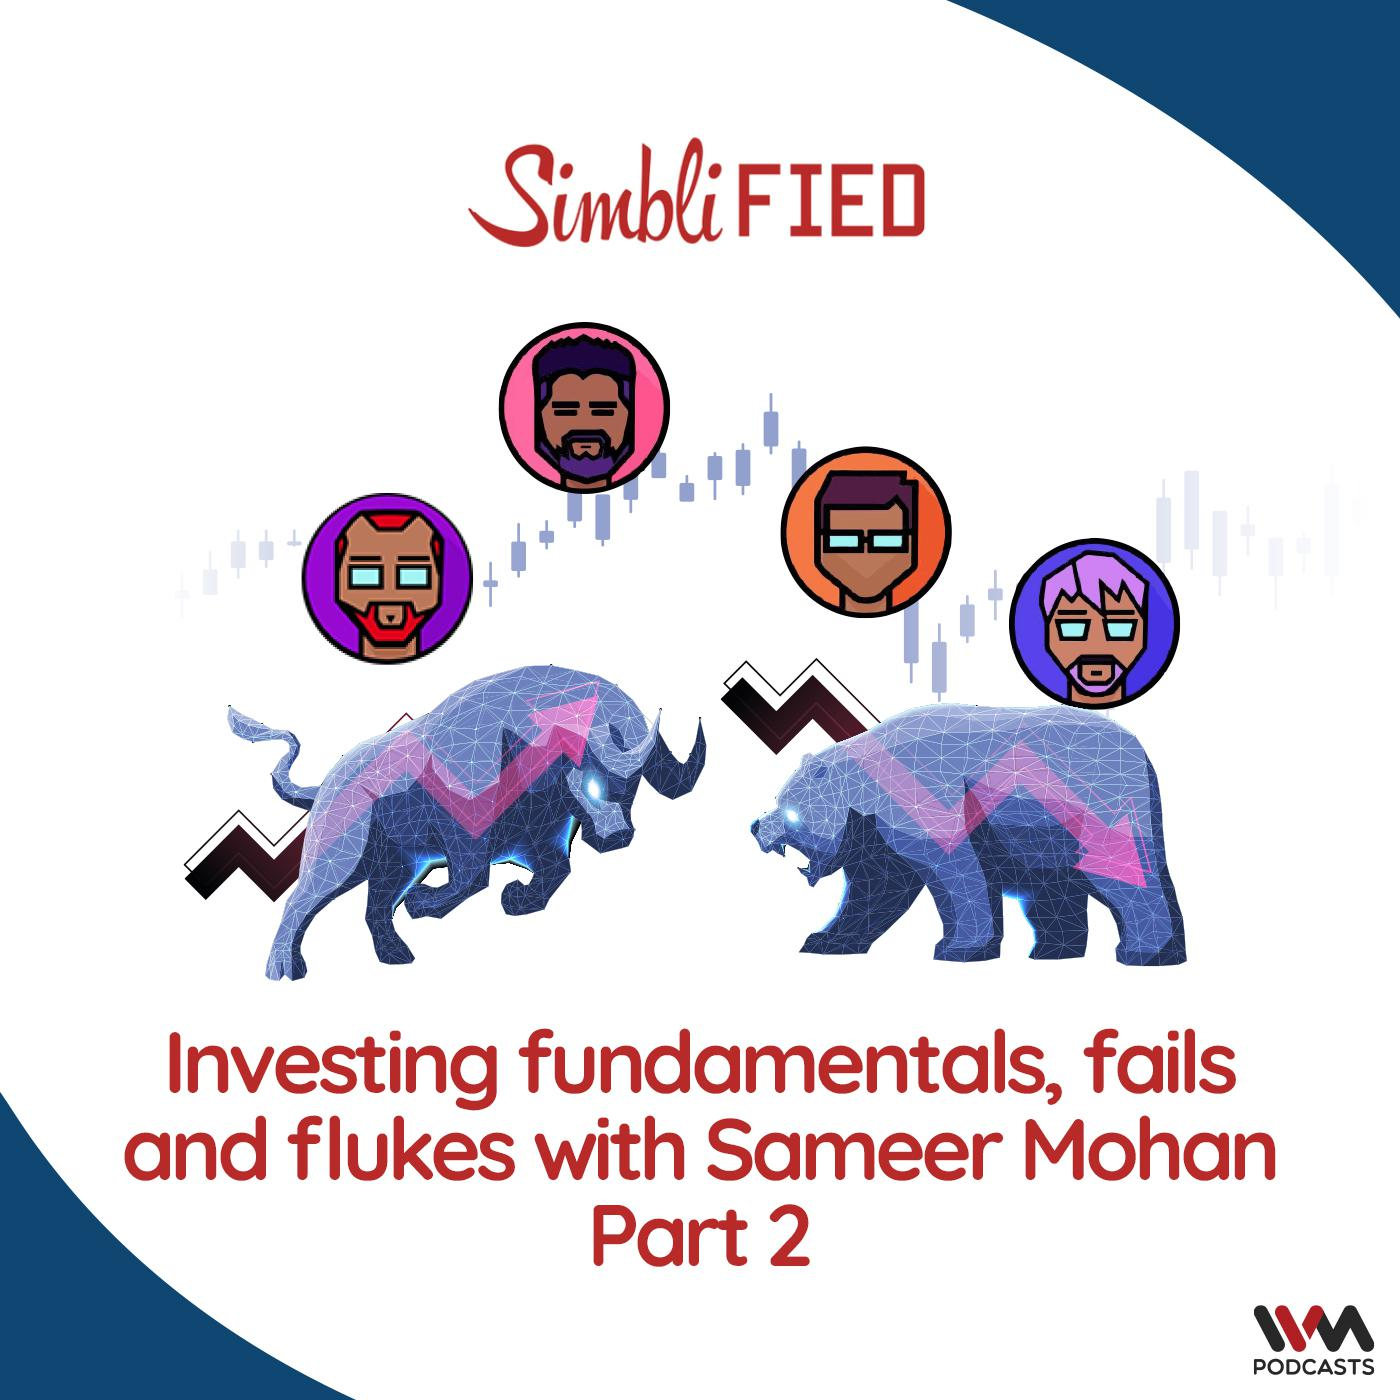 Investing fundamentals, fails and flukes with Sameer Mohan - Part 2